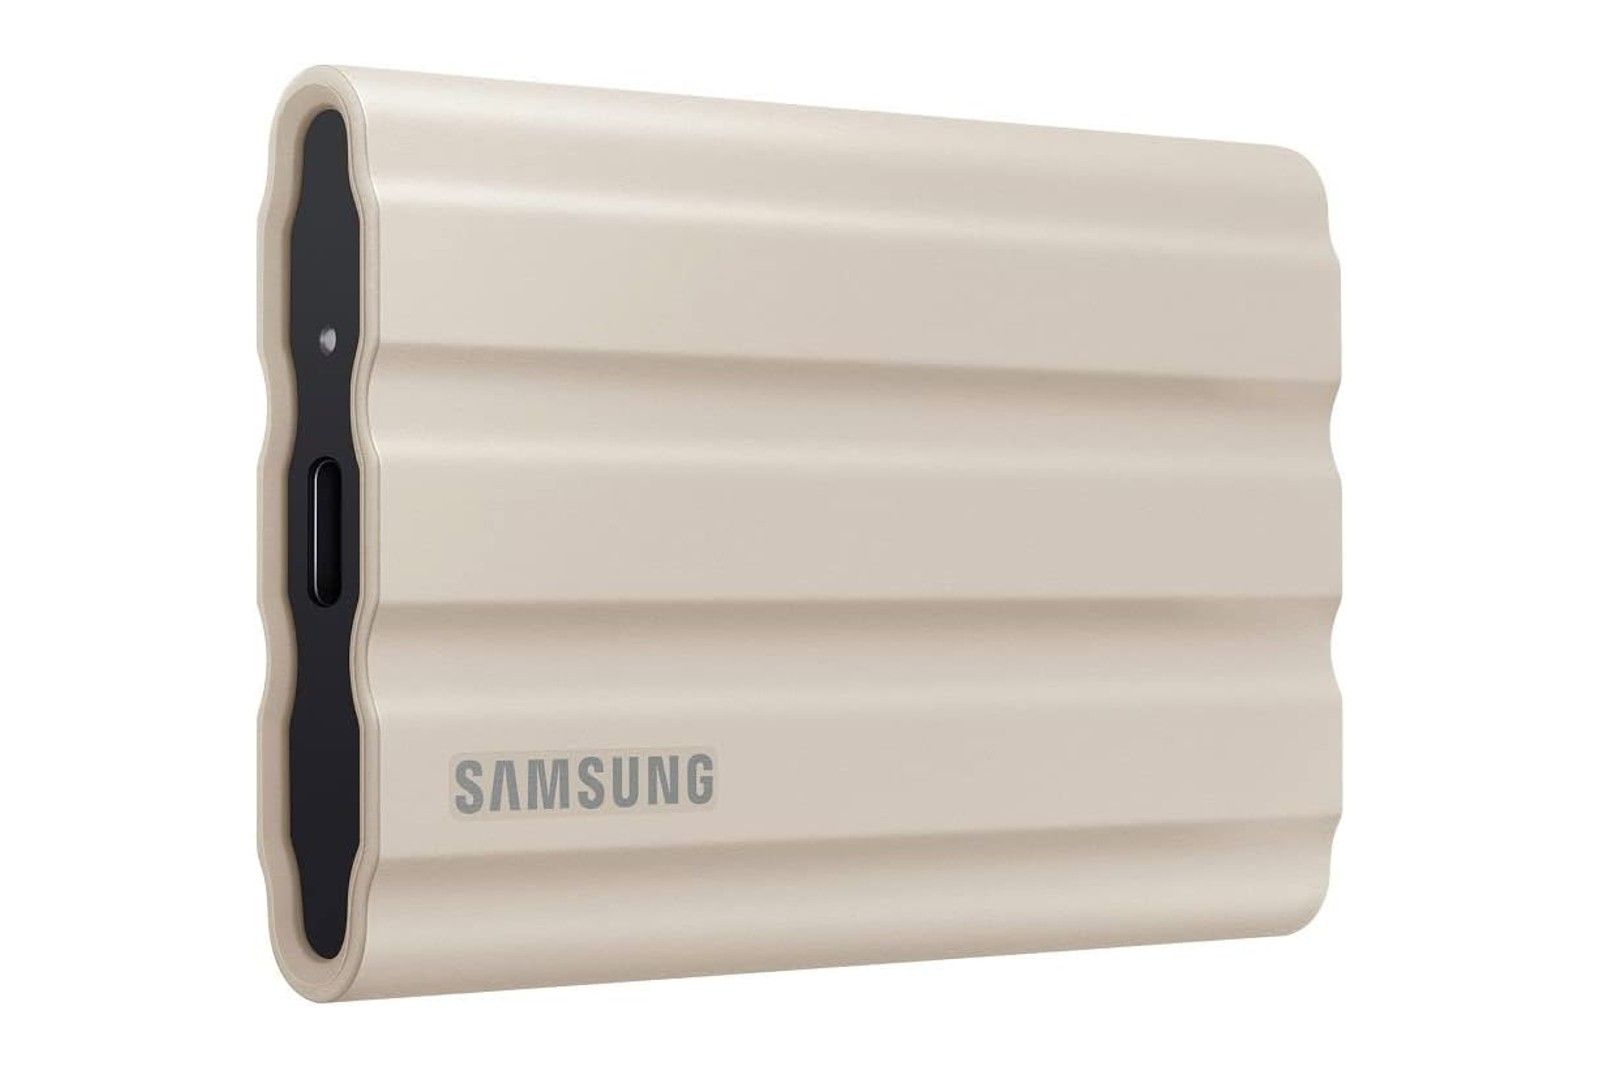 SAMSUNG T7 Shield Portable External Solid State Drive